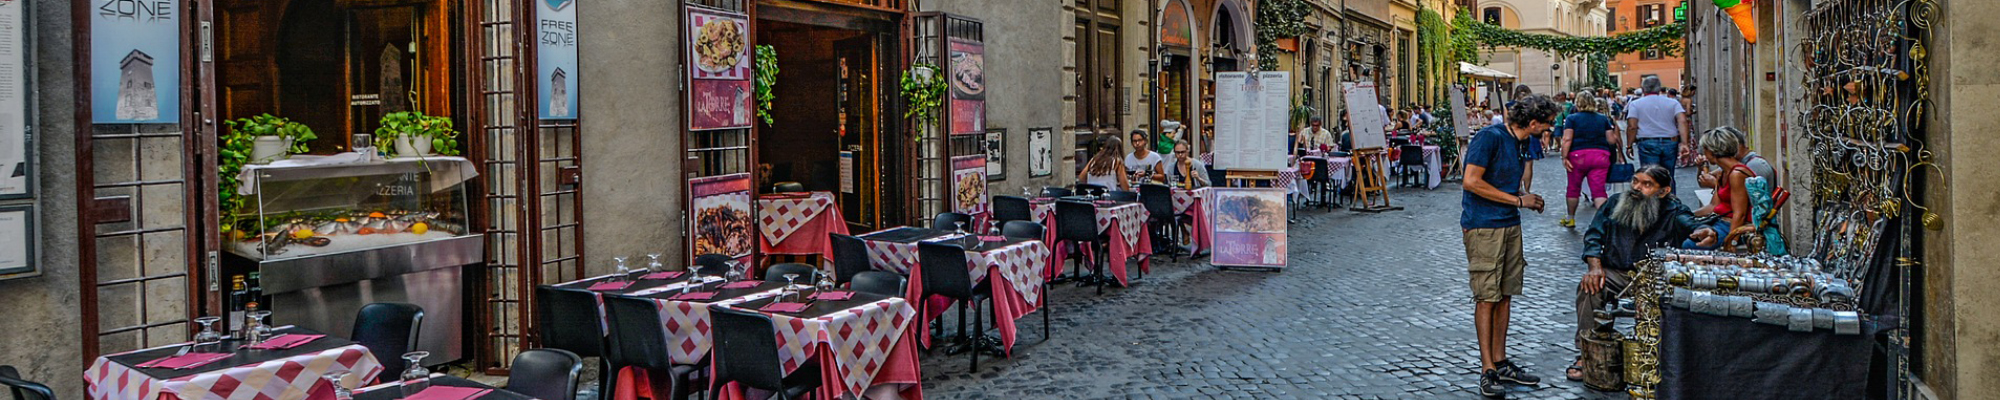 View of street in Italy, cafe and street vendor